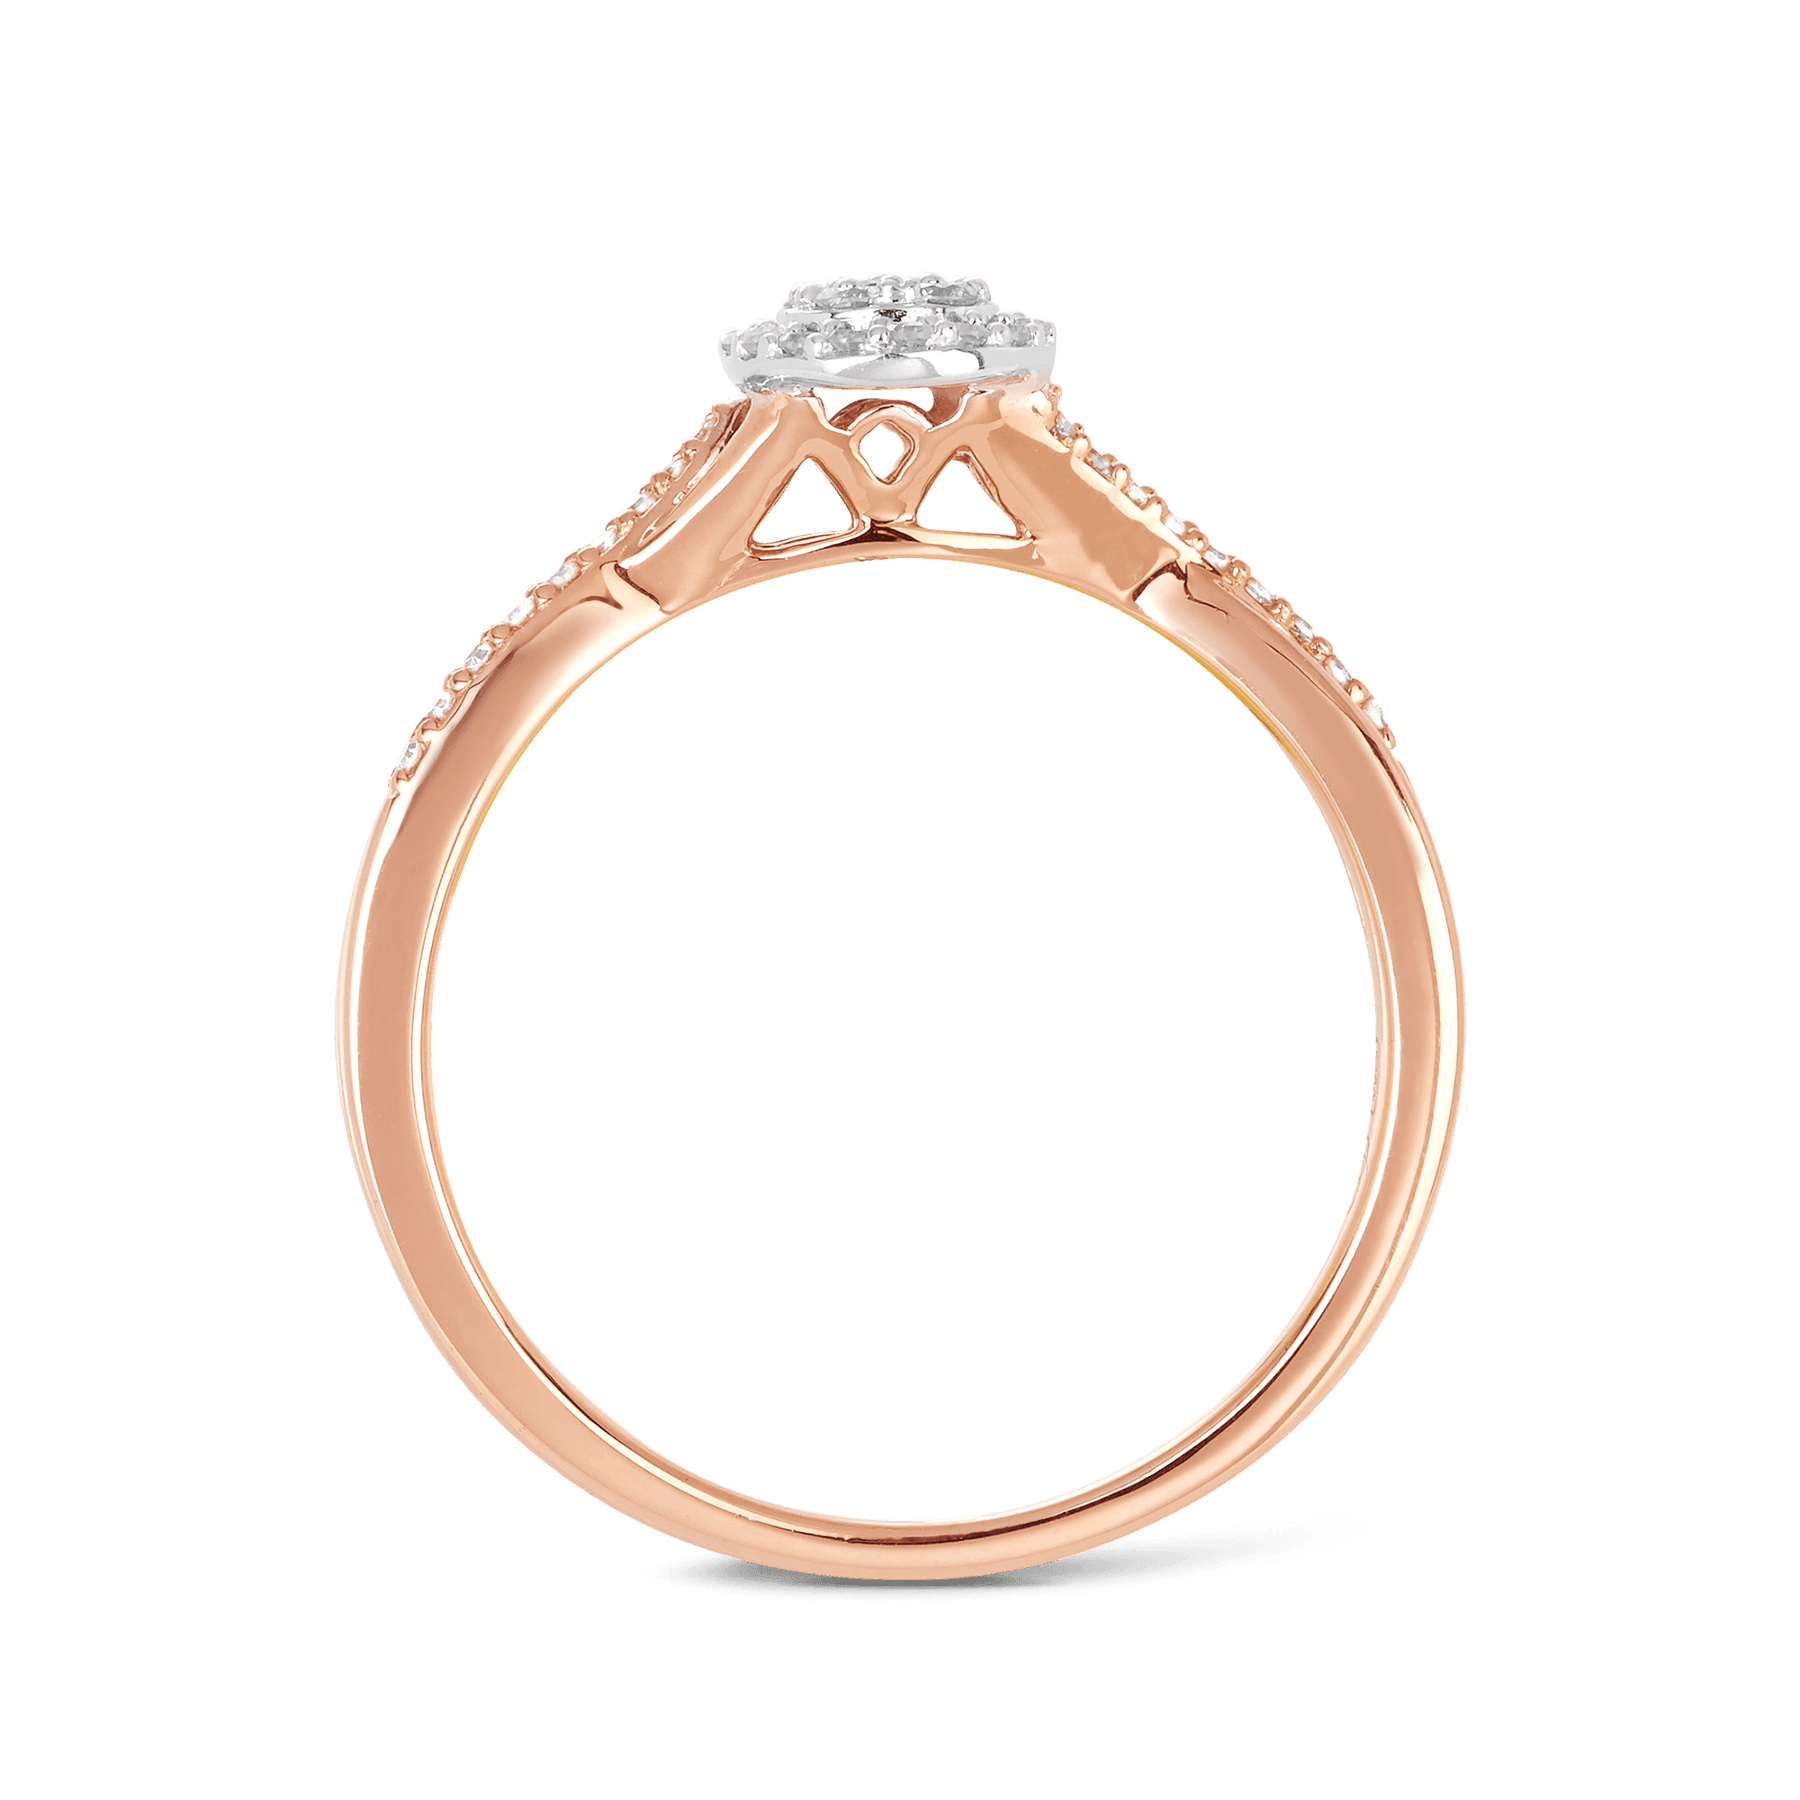 I Will® Round Brilliant Cut Diamond Cluster Pear Halo Promise Ring in 9ct Rose Gold - Wallace Bishop